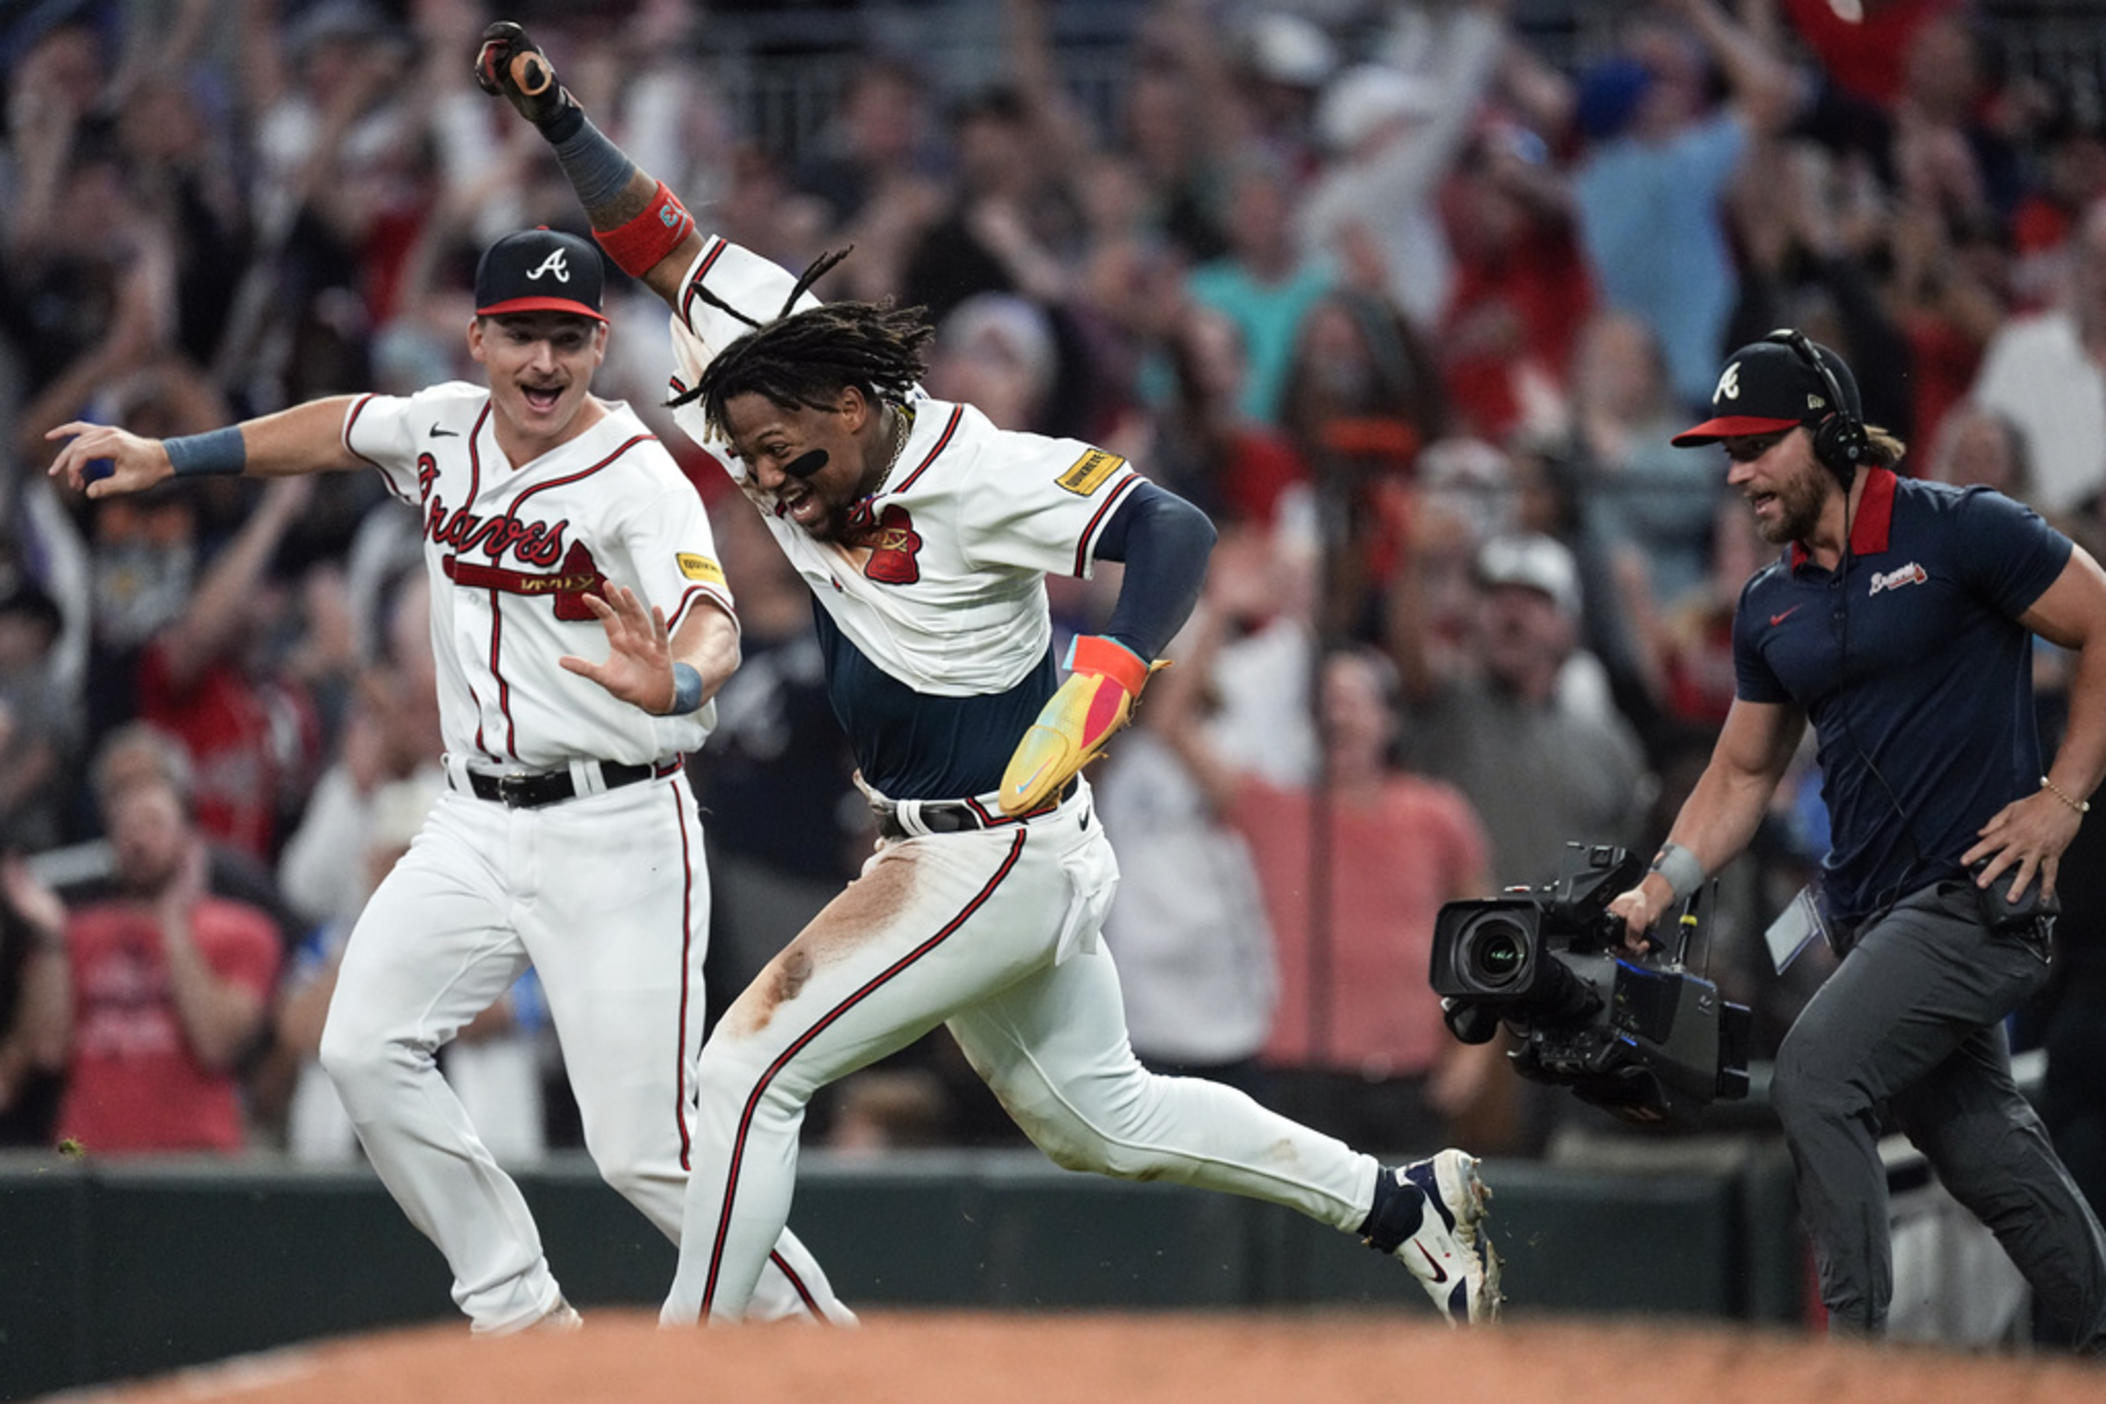 Stealing the show: Acuña leads speedsters seeking October impact in pitch  clock era